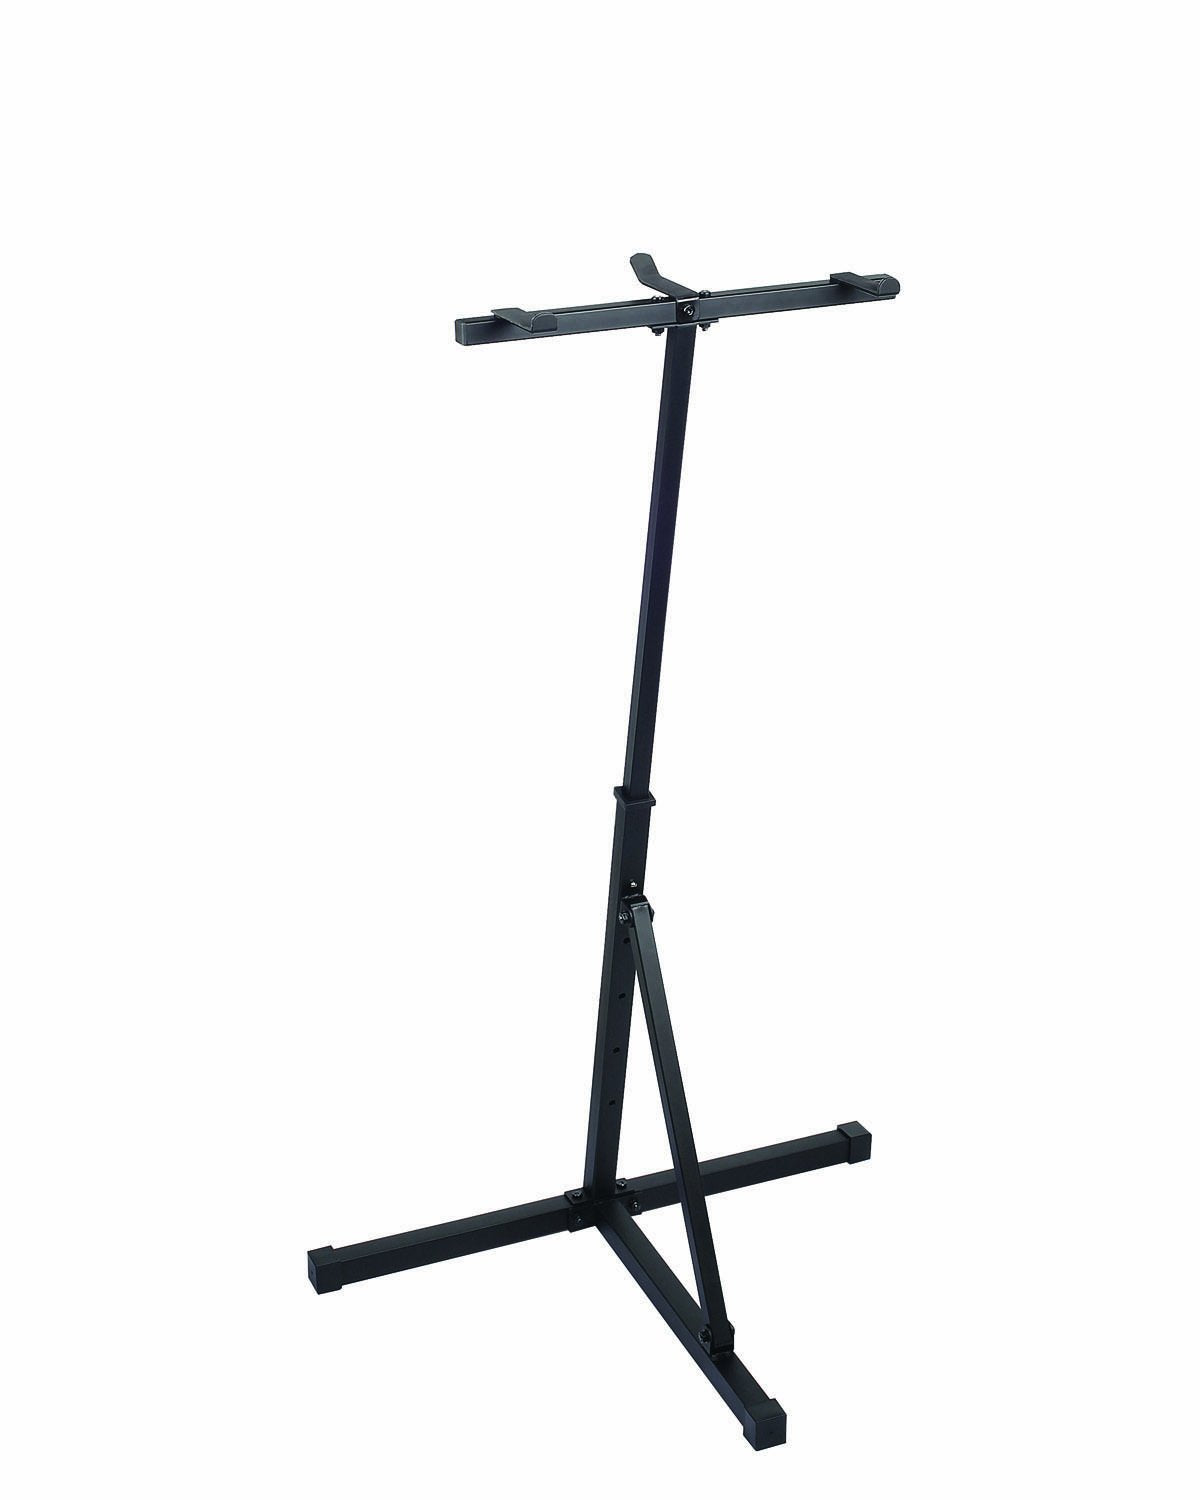 Rock Band 3 - Keyboard Stand for Xbox 360, PlayStation 3 and Wii